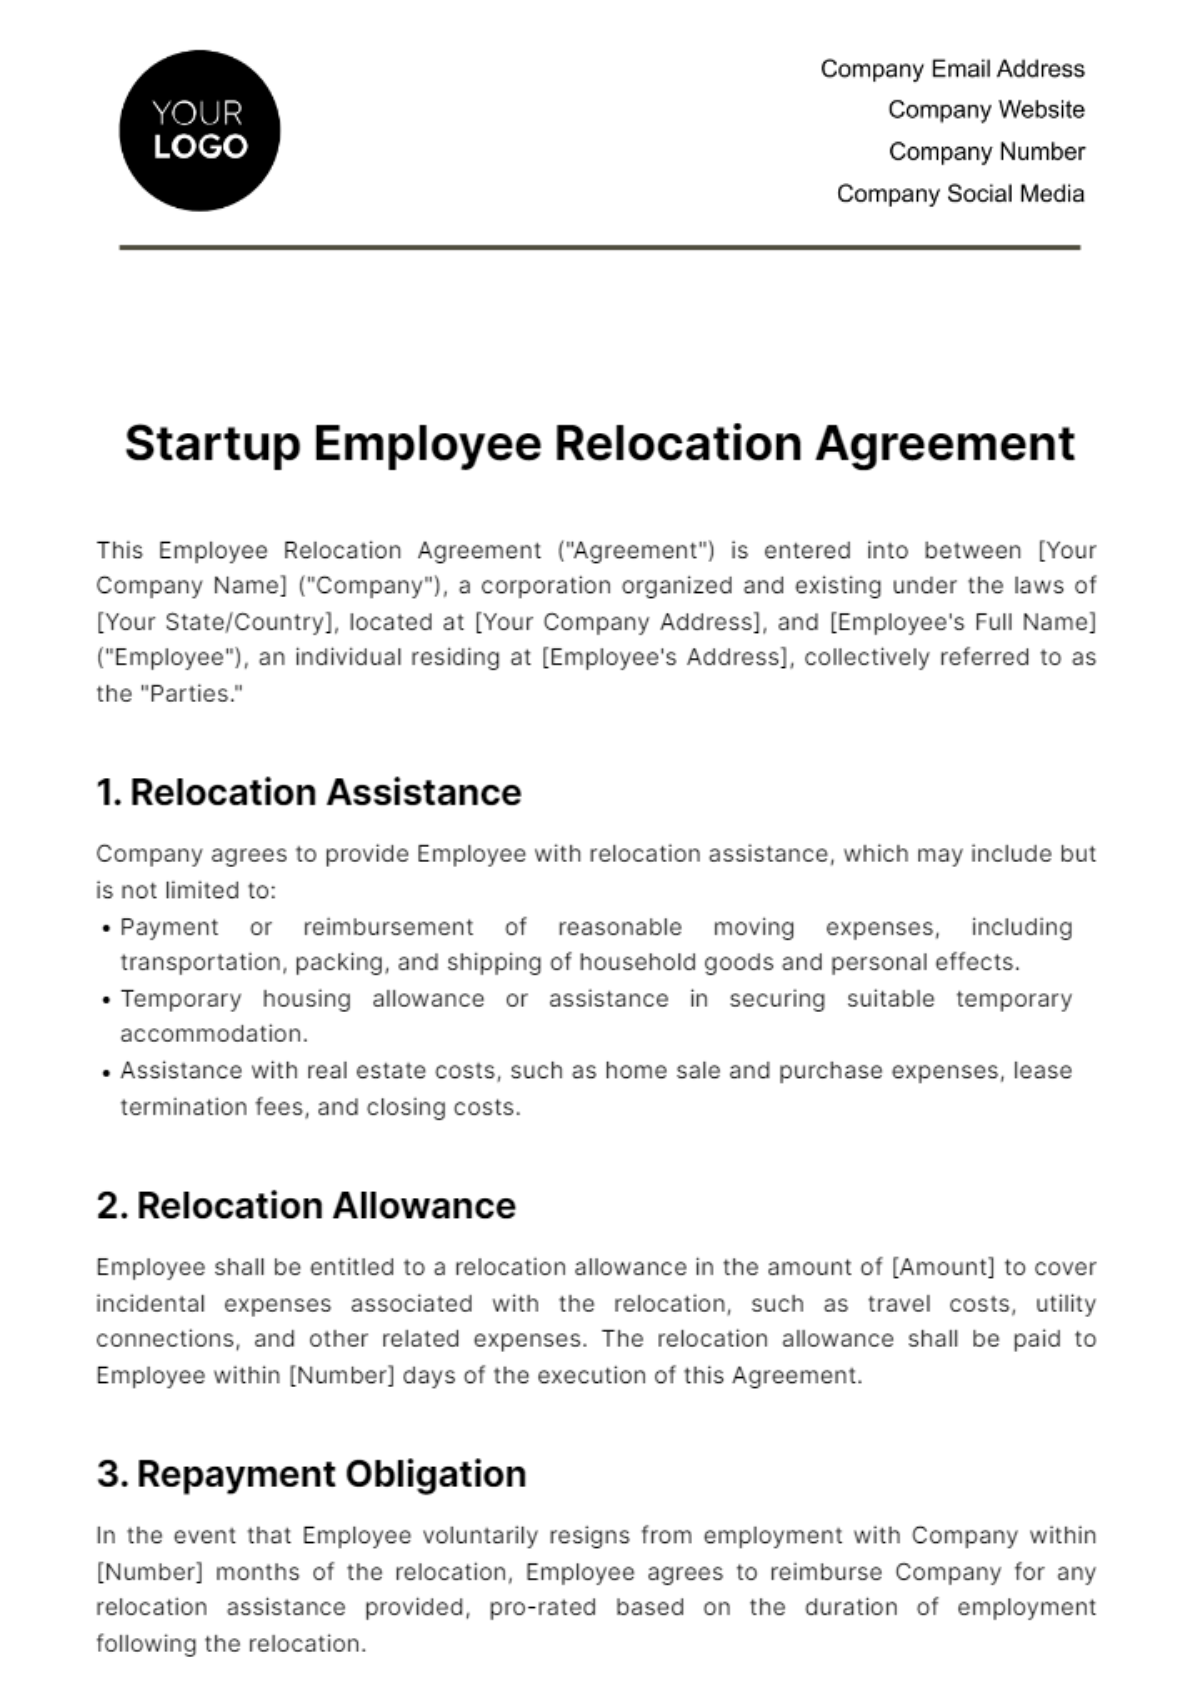 Startup Employee Relocation Agreement Template